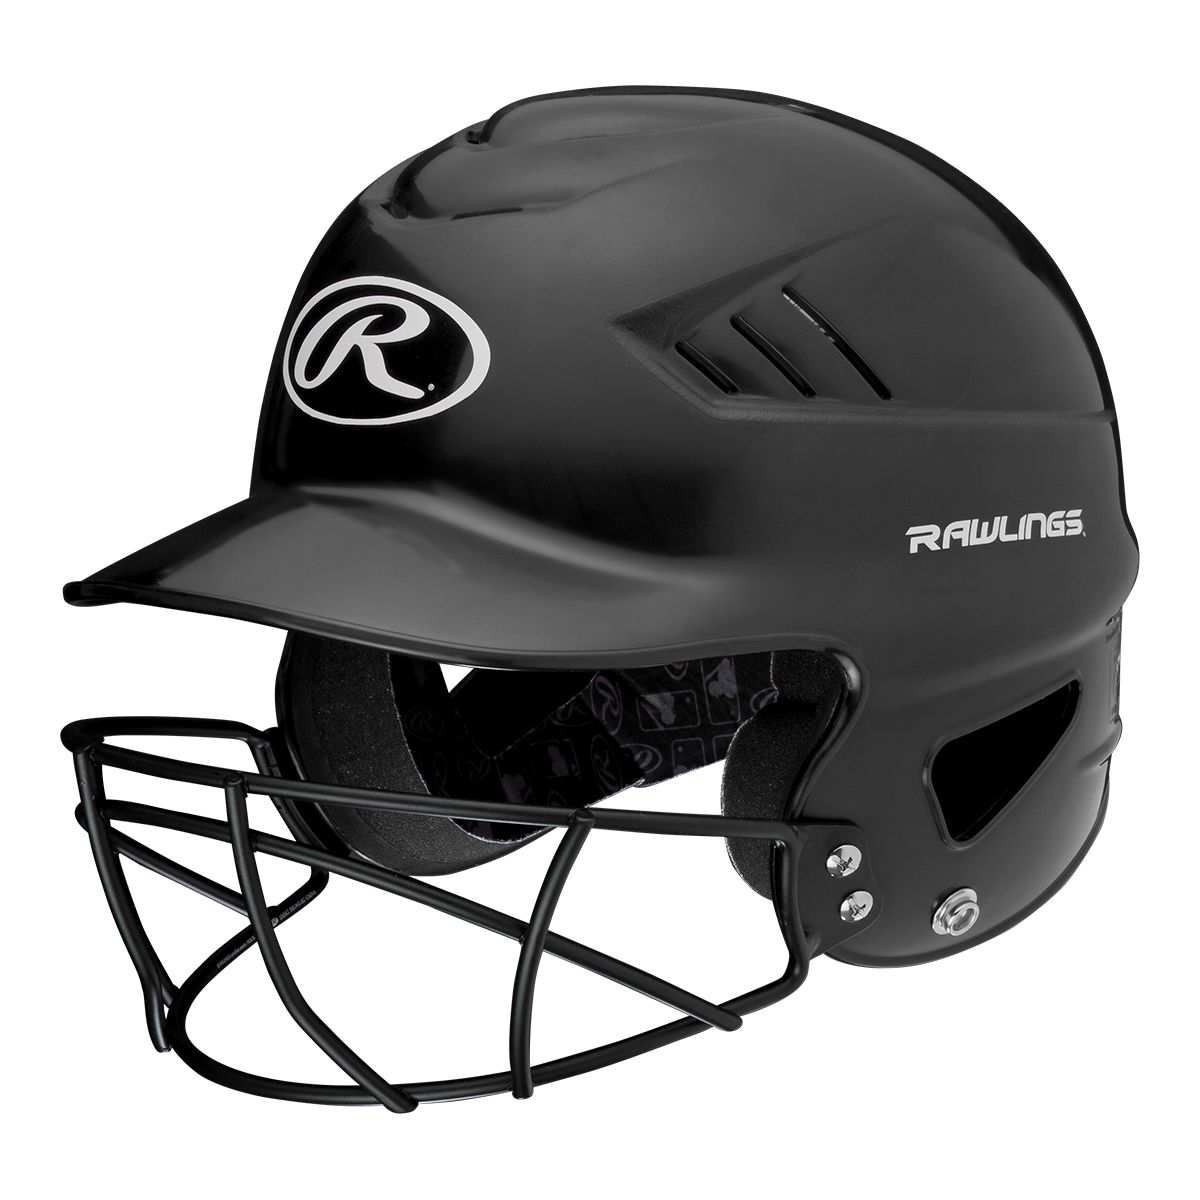 Image of Rawlings Osfm Helmet with Face Guard